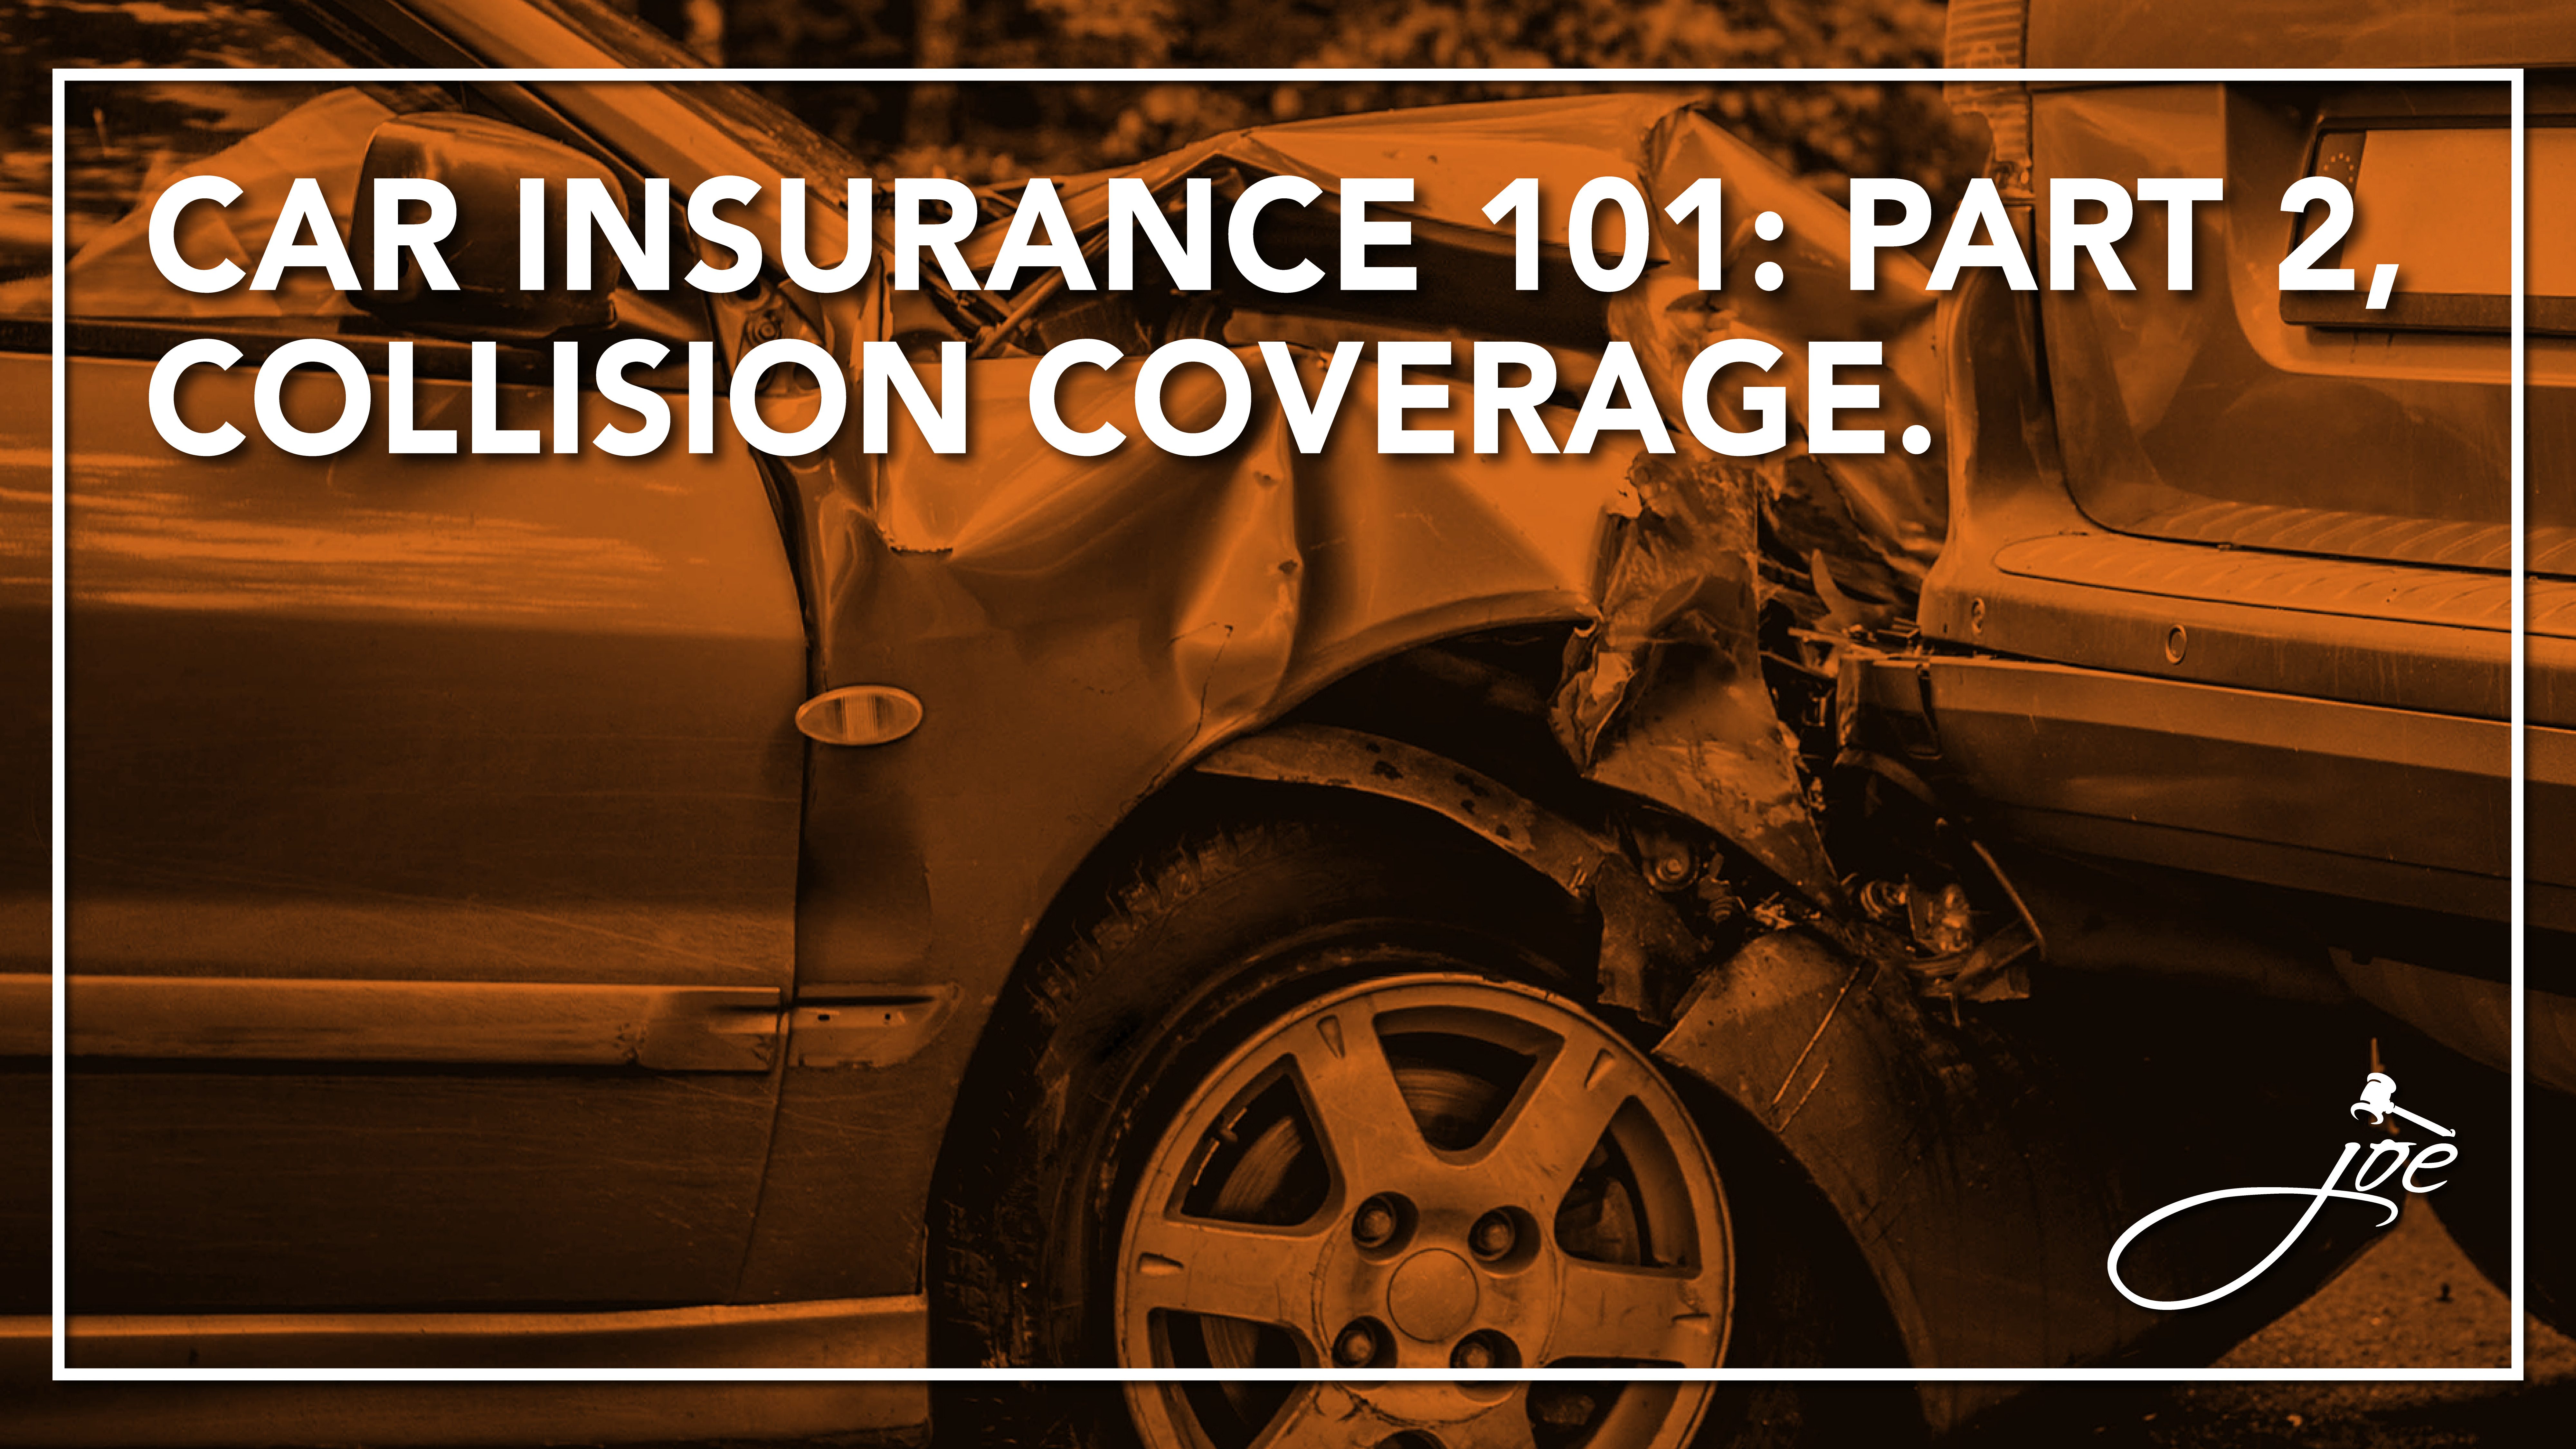 Florida Car Insurance 101: Part 2 – What Is Collision Coverage And Why Is It Important?